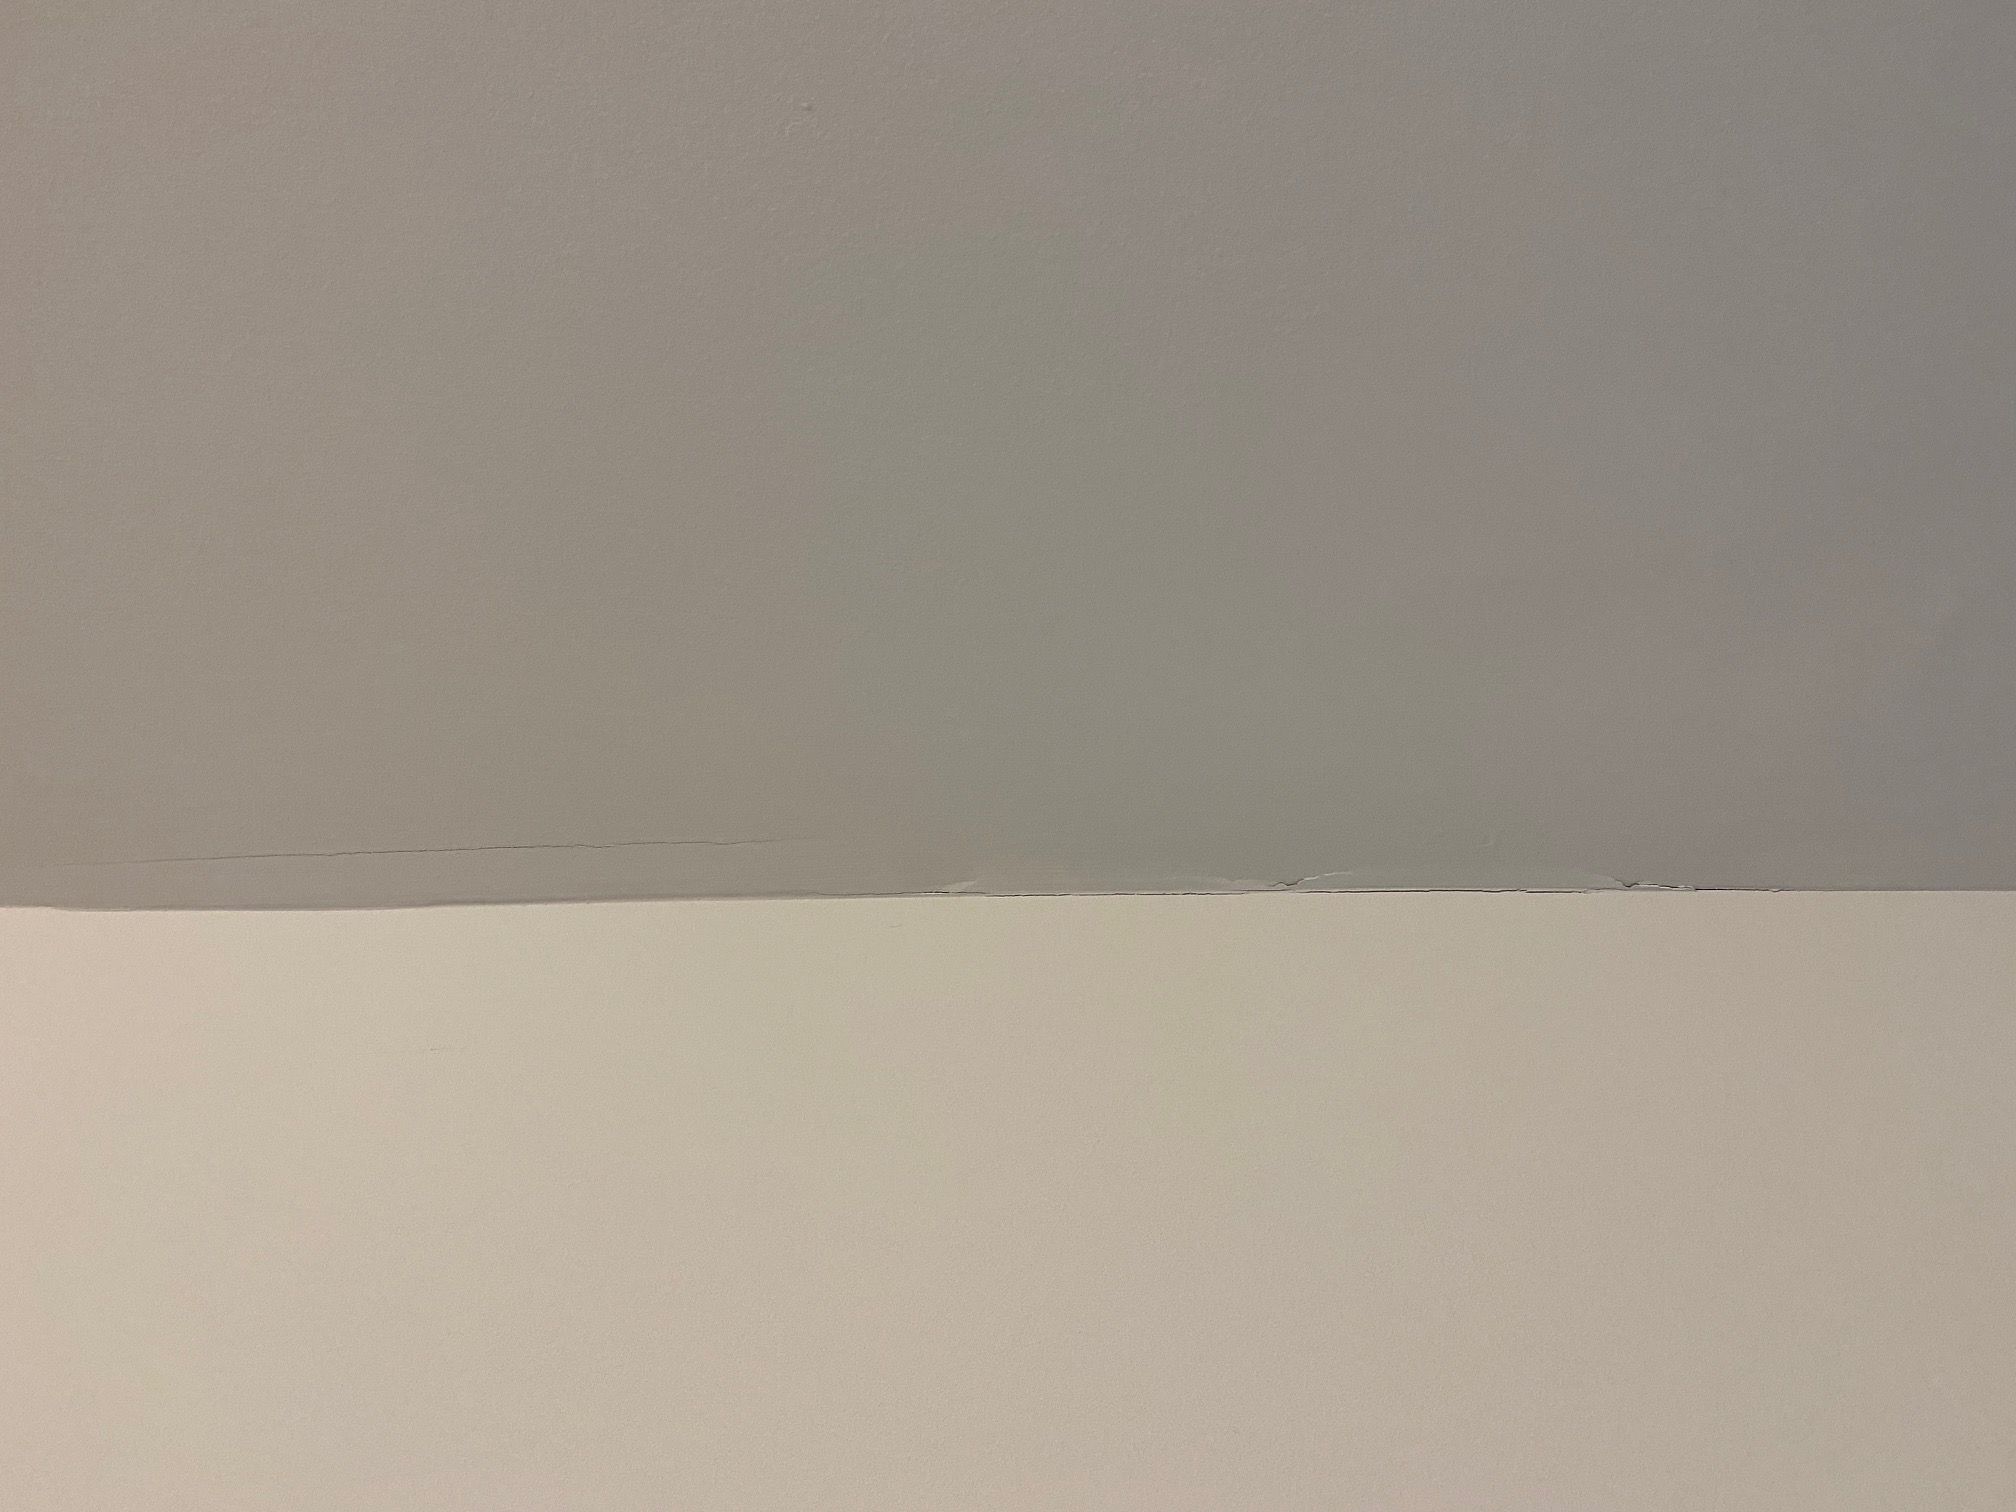 three foot long crack in ceiling and wall 